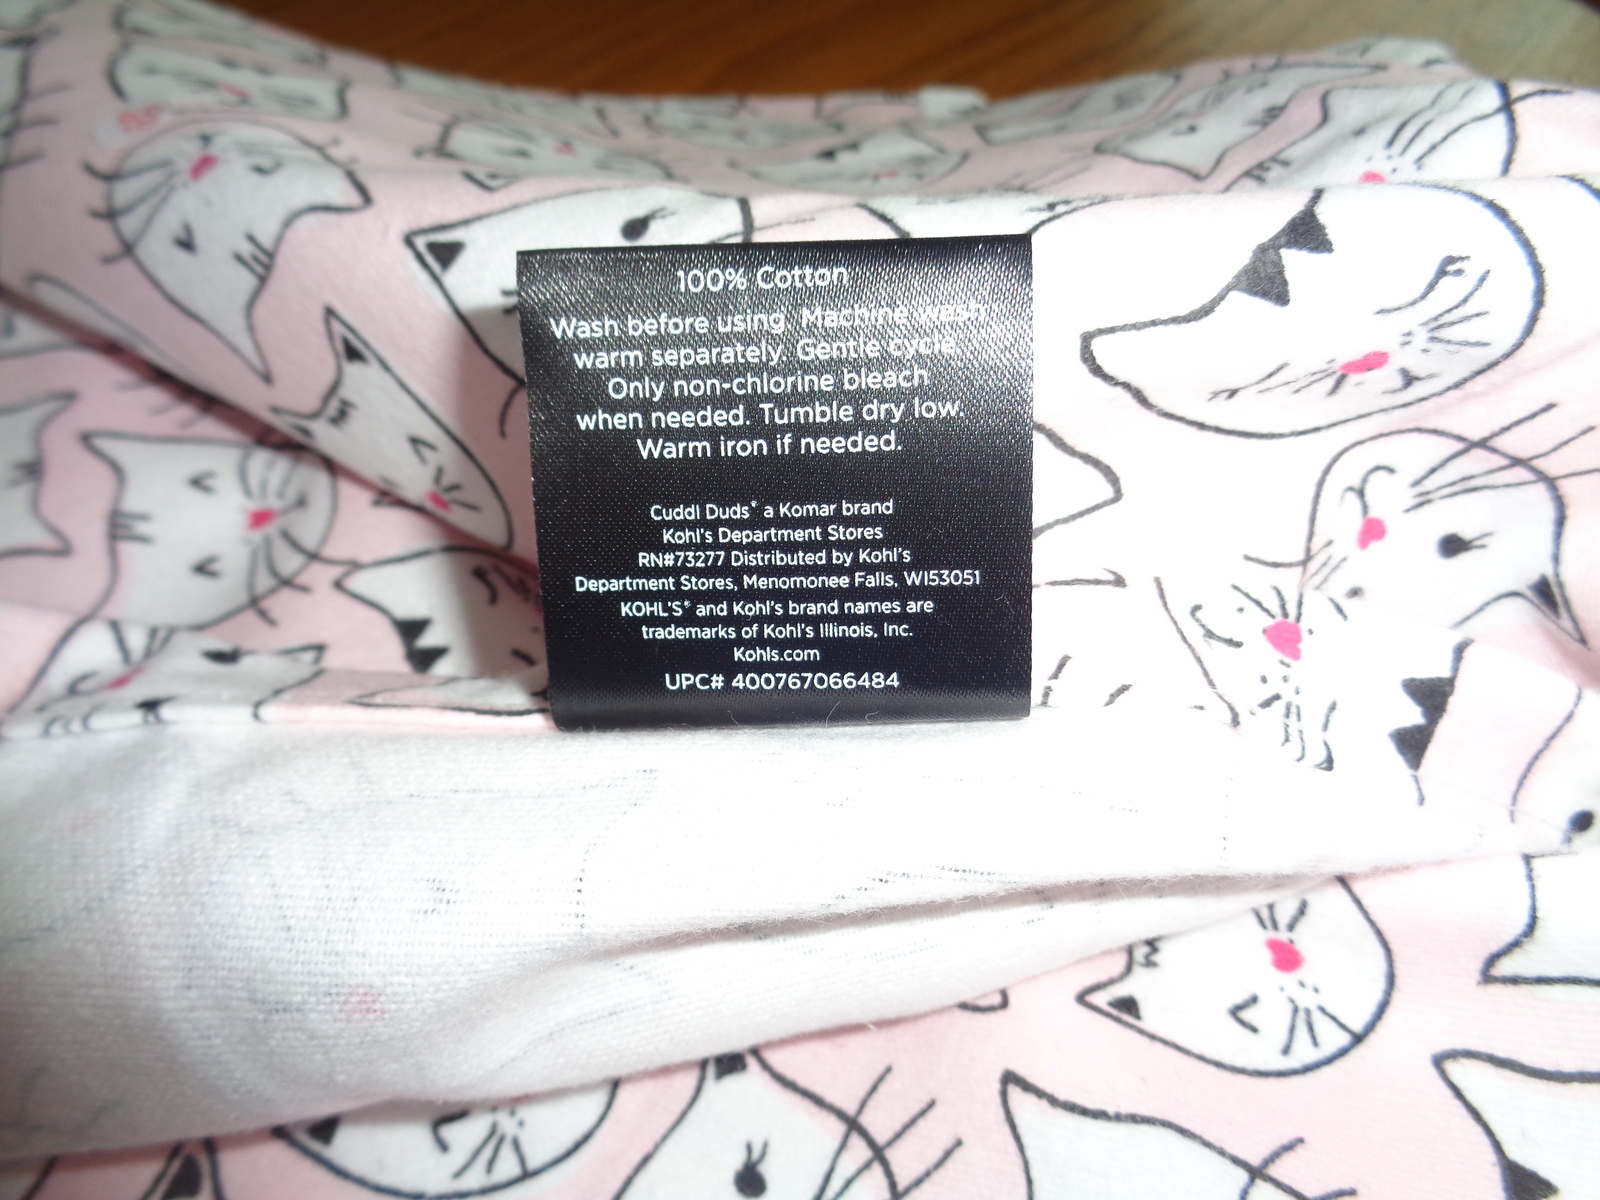 NEW Cuddl Duds Queen Flat Sheet Pink Cats and 50 similar items